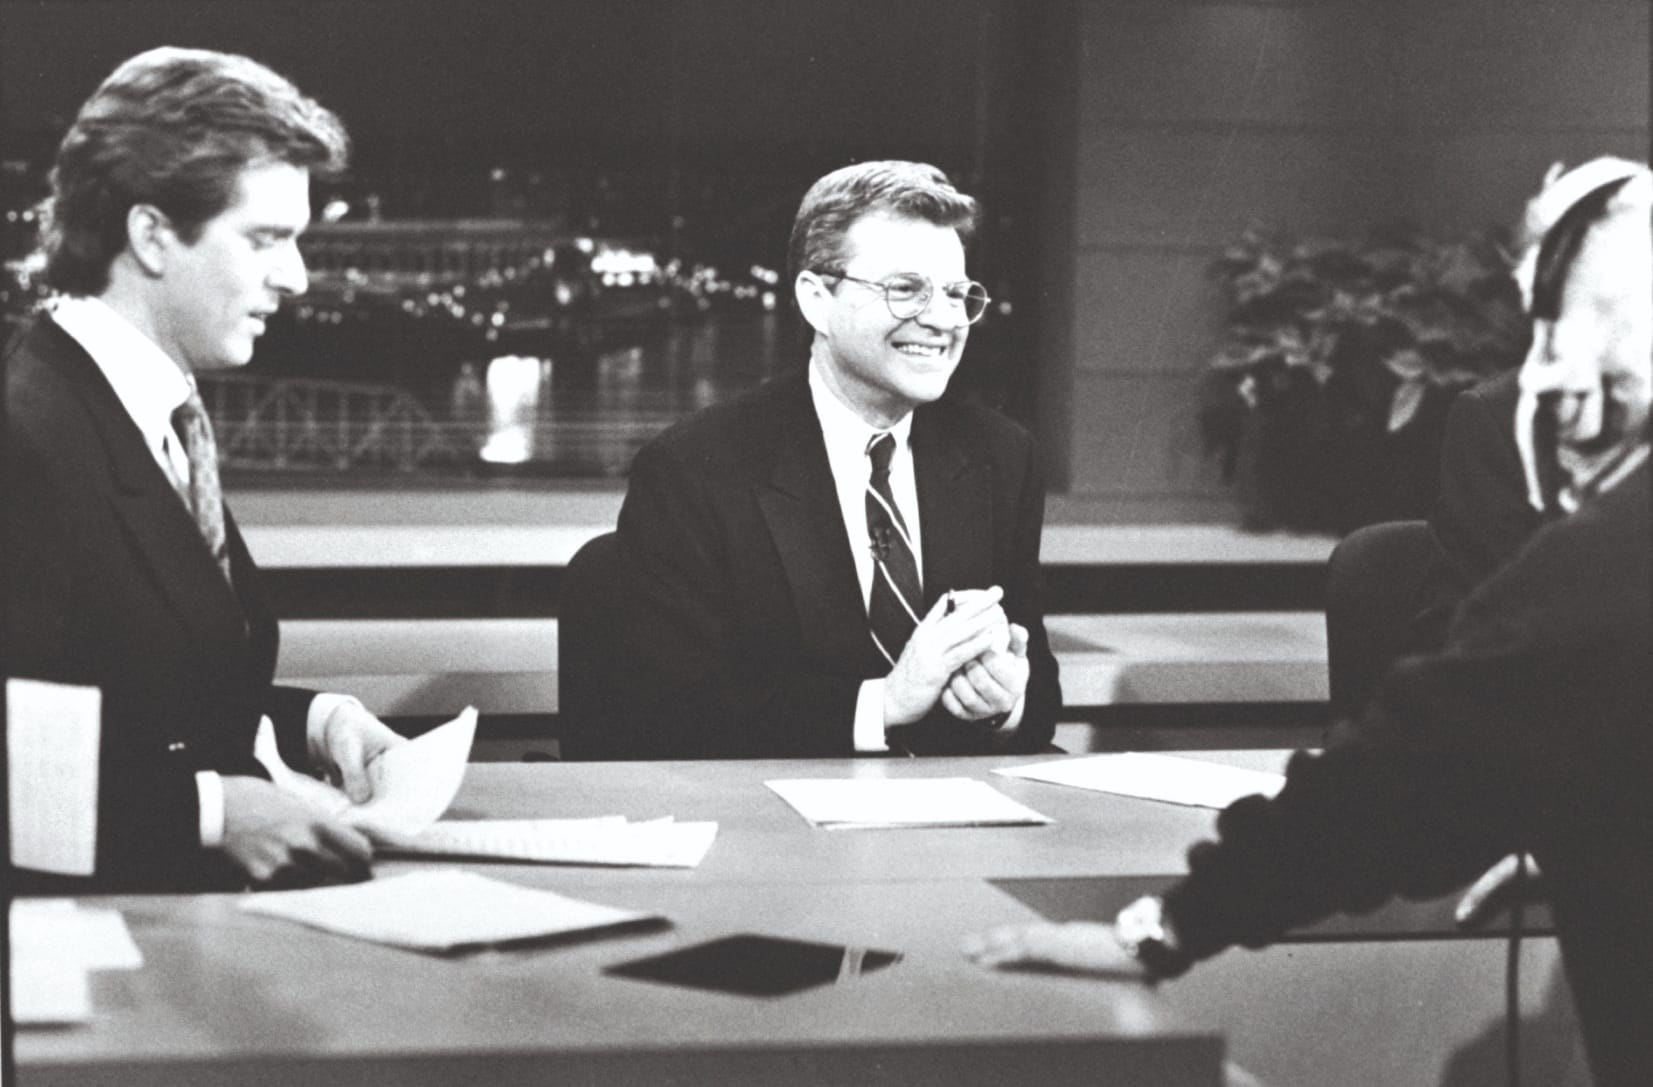 Jerry Springer chatting with co-anchor Jim Watkins and a technician before a news broadcast at WLWT-TV, 15th December 1992